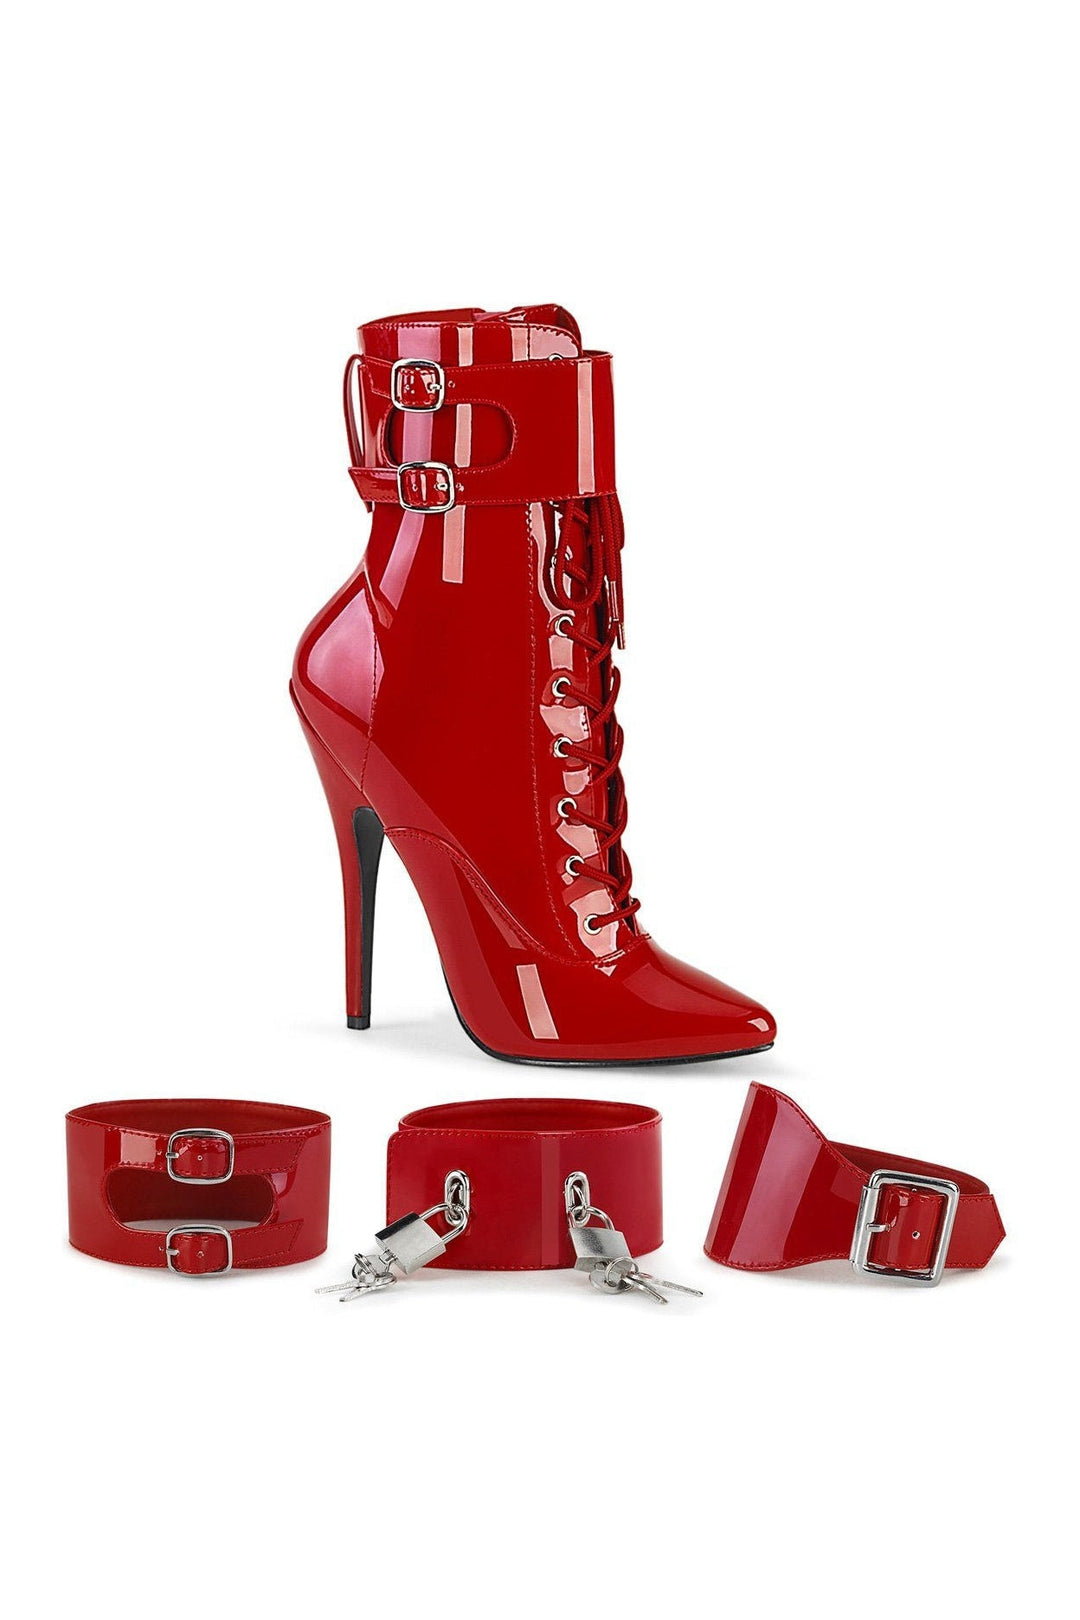 Devious Red Ankle Boots Platform Stripper Shoes | Buy at Sexyshoes.com